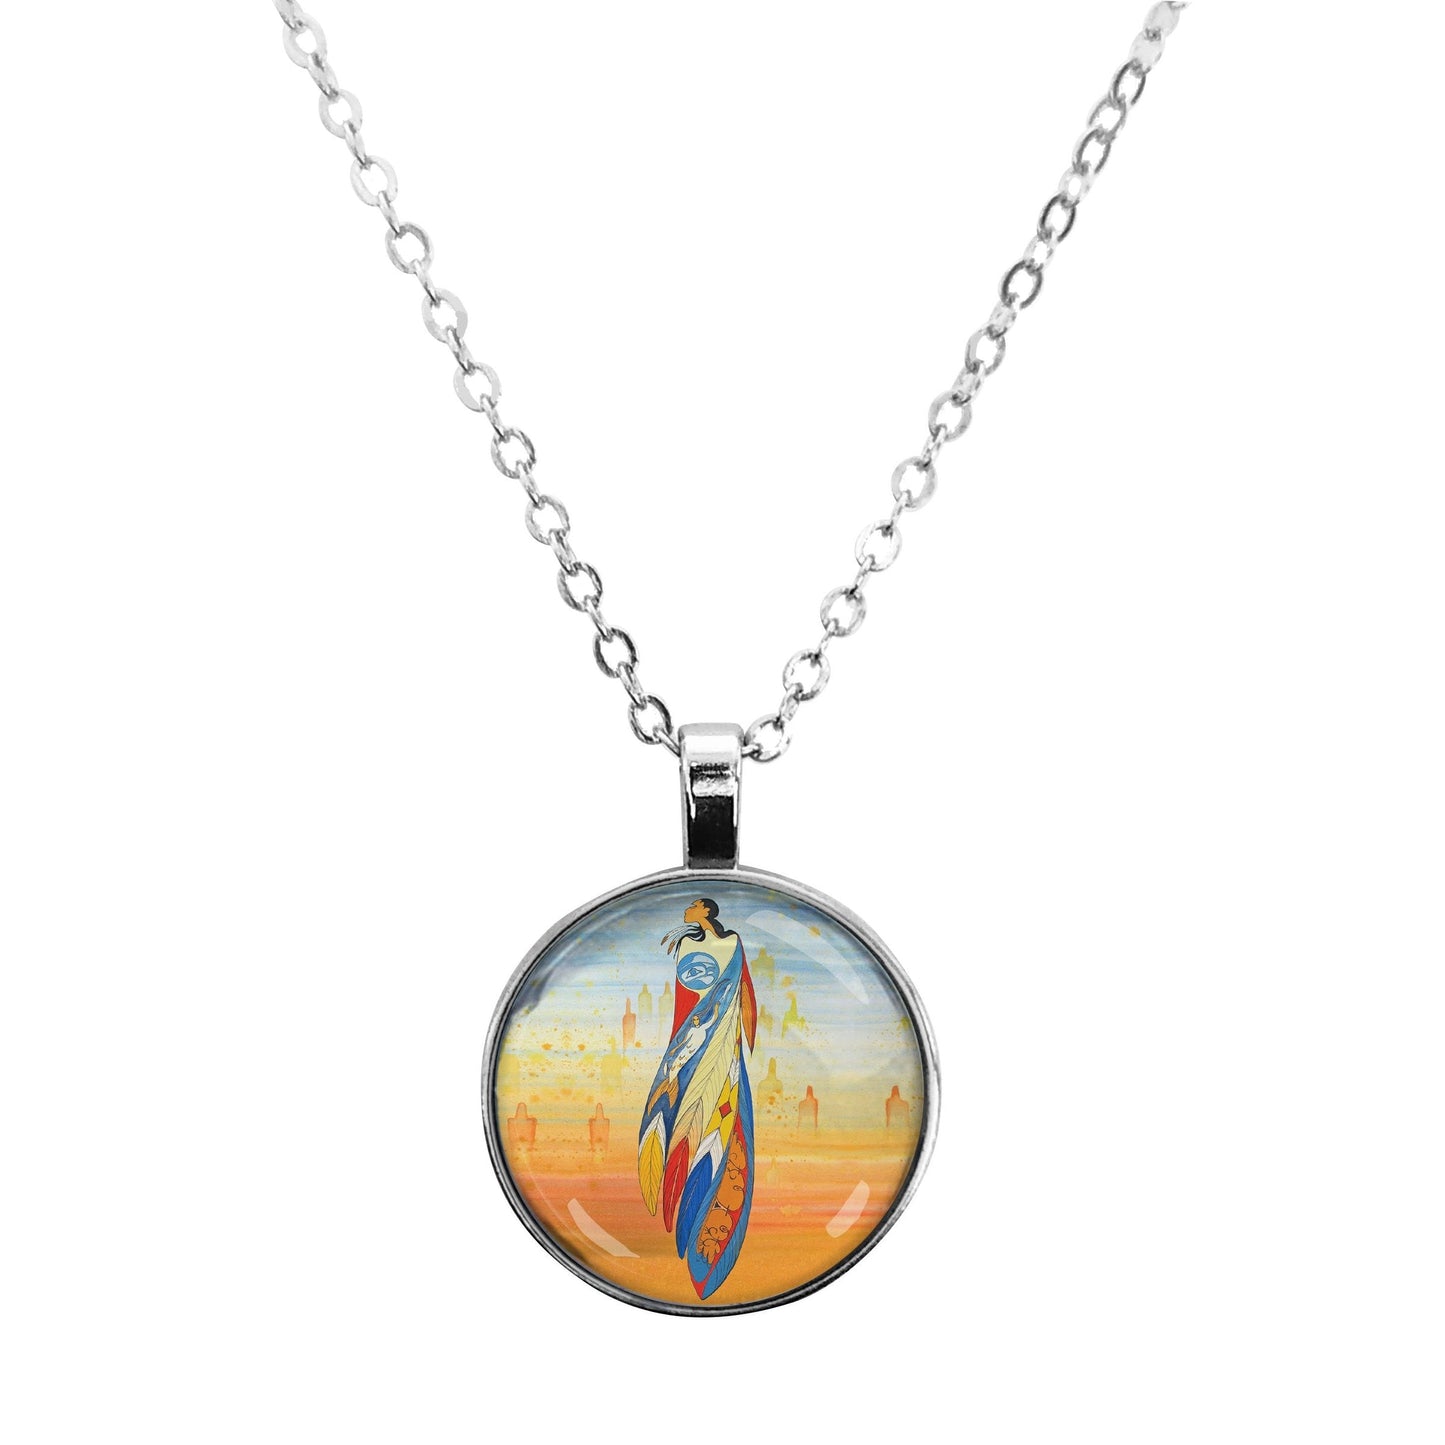 "Not Forgotten" Glass Dome Necklace, artwork by Native artist Maxine Noel